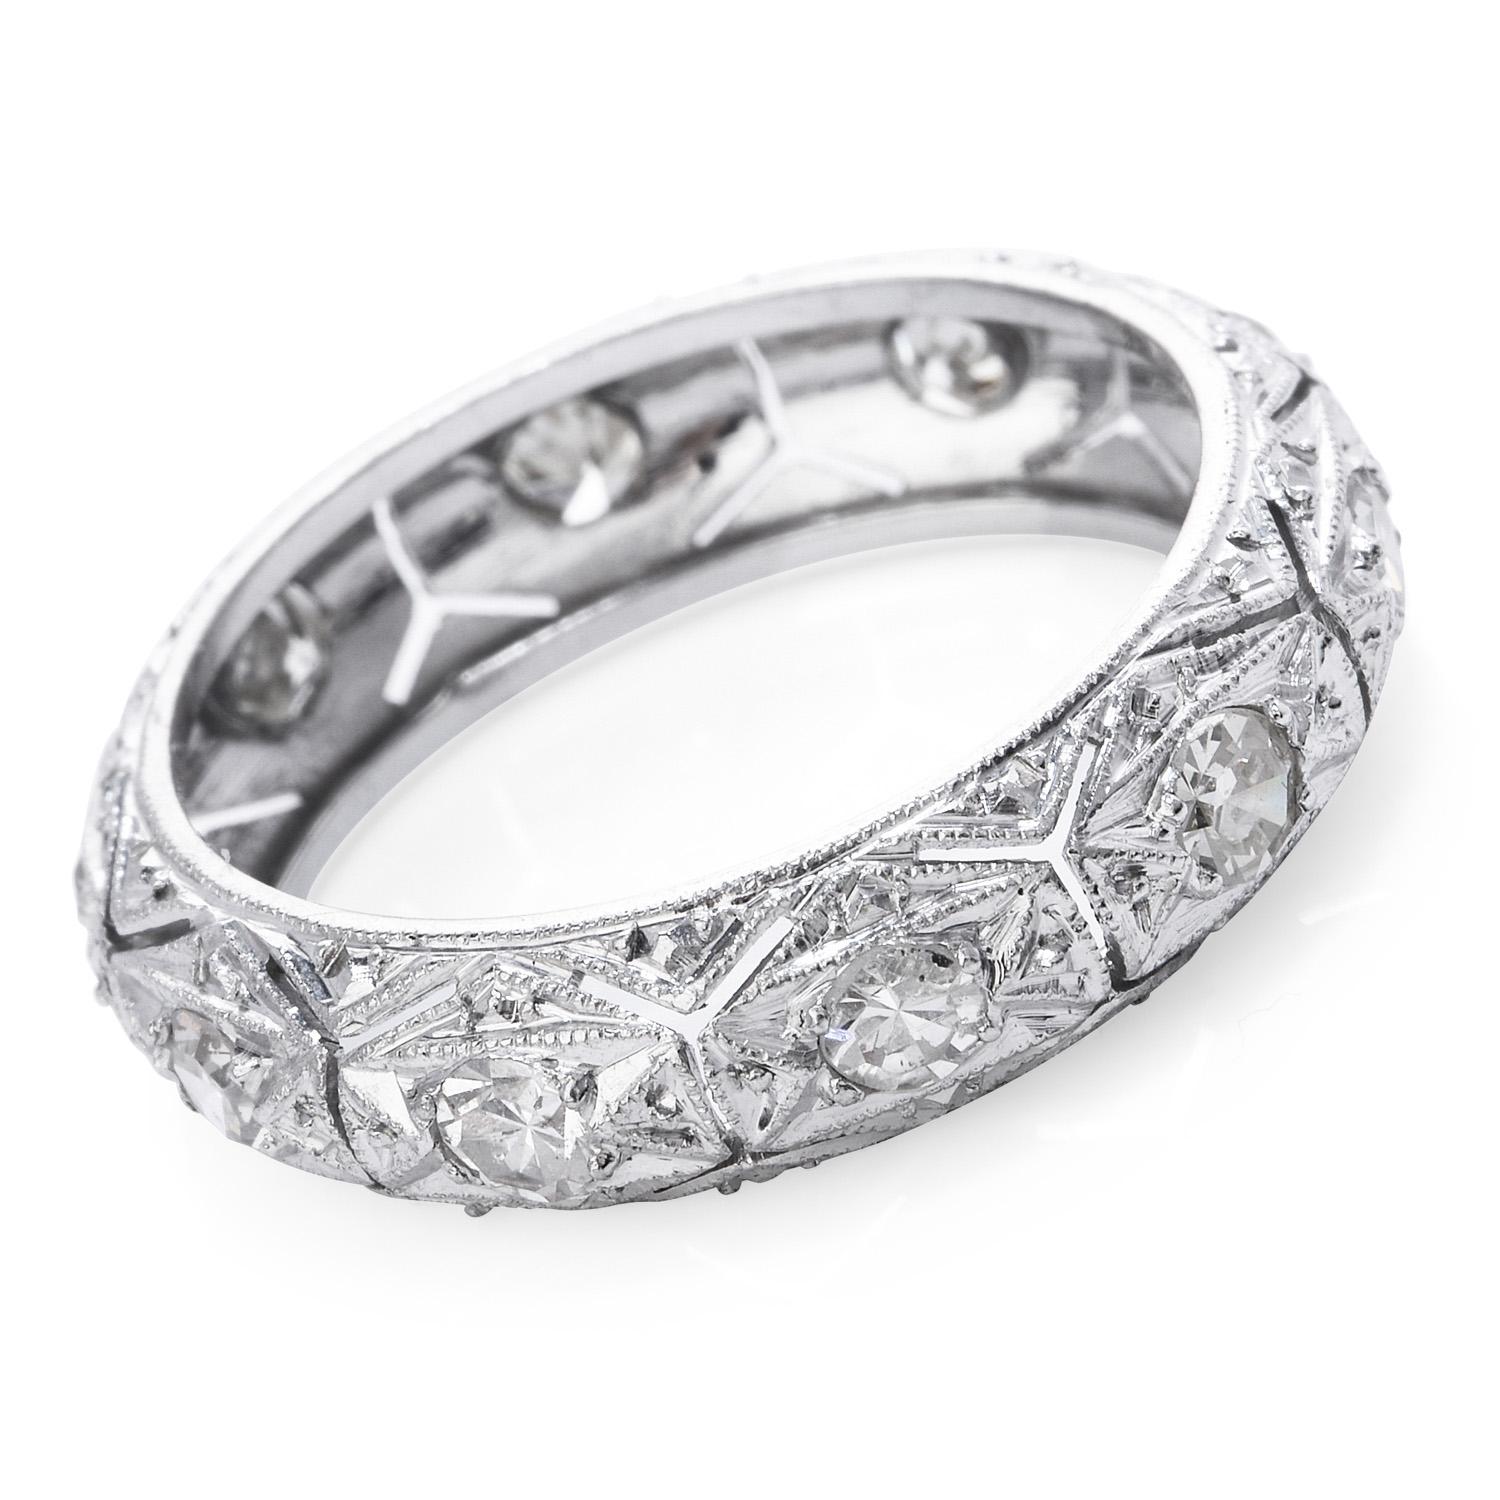 Vintage Art Deco Style Diamond wedding eternity band ring, perfect for unisex wearing.

Crafted in Platinum, the center is adorned by (10) round-cut, prong-set, genuine diamonds weighing in total 0.72 carats, (G-H color and VS-SI  Clarity),

This